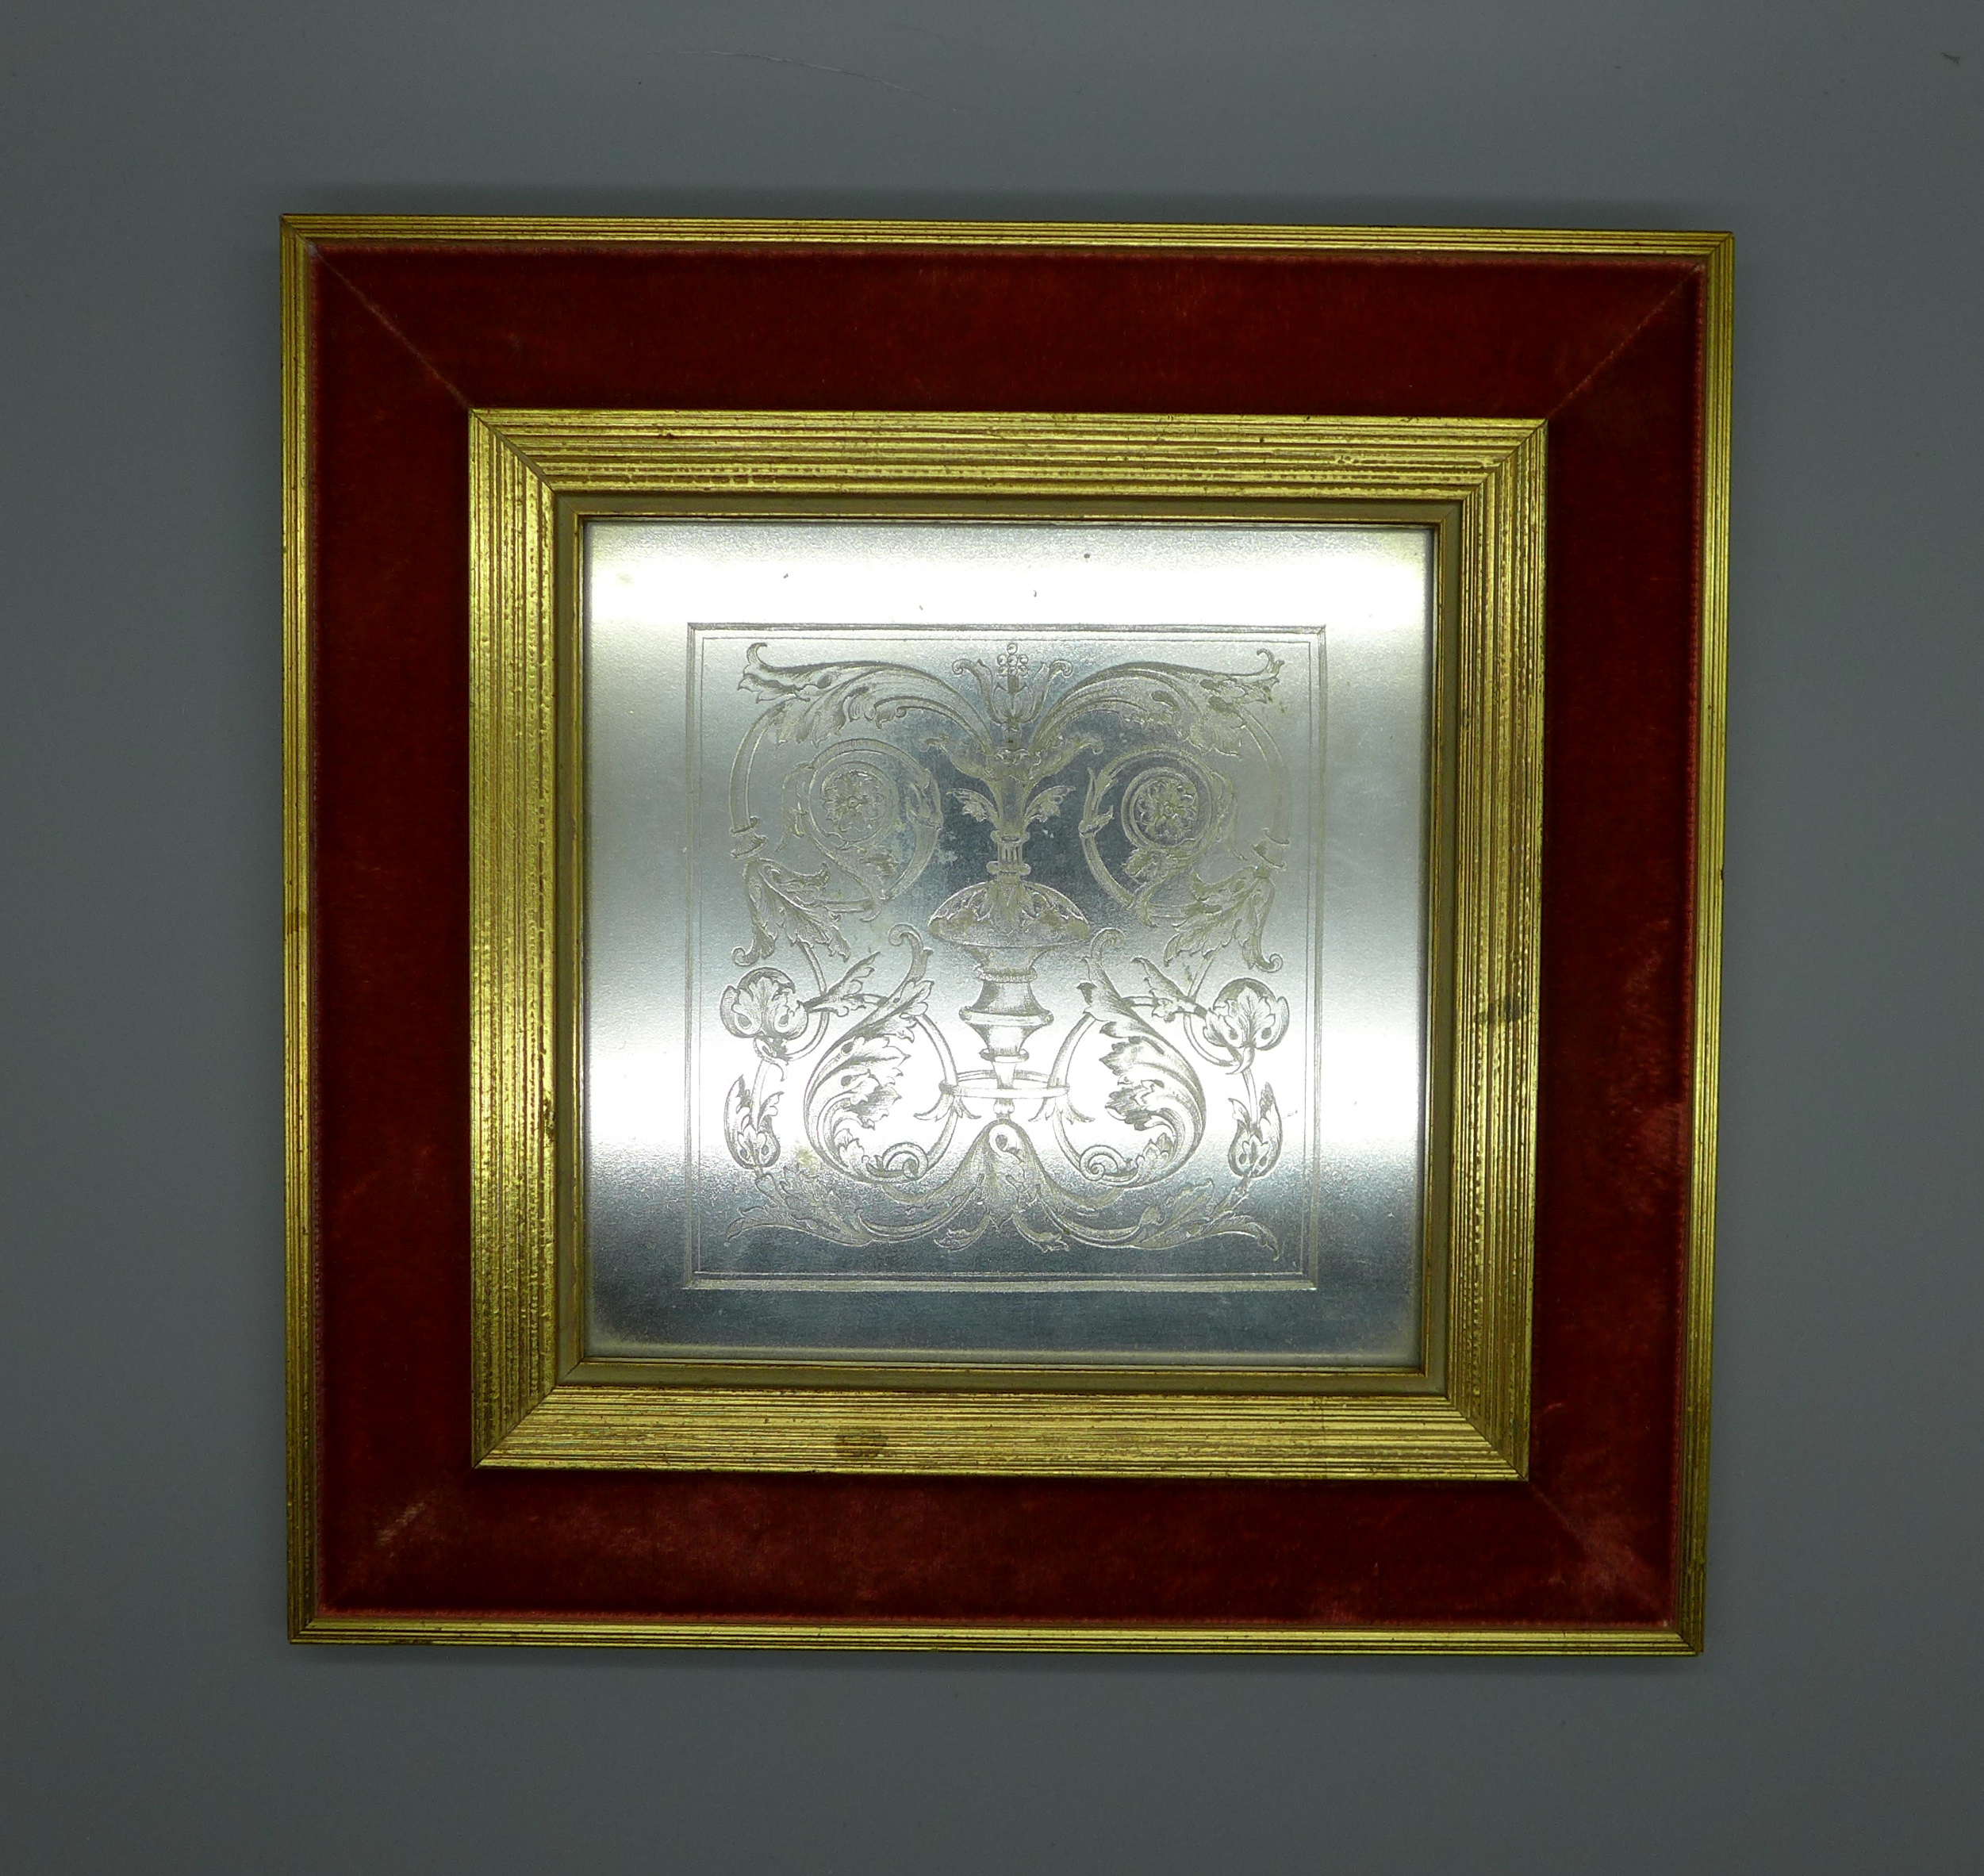 An etched white metal plaque in a frame, 13cm x 13cm - Image 2 of 2